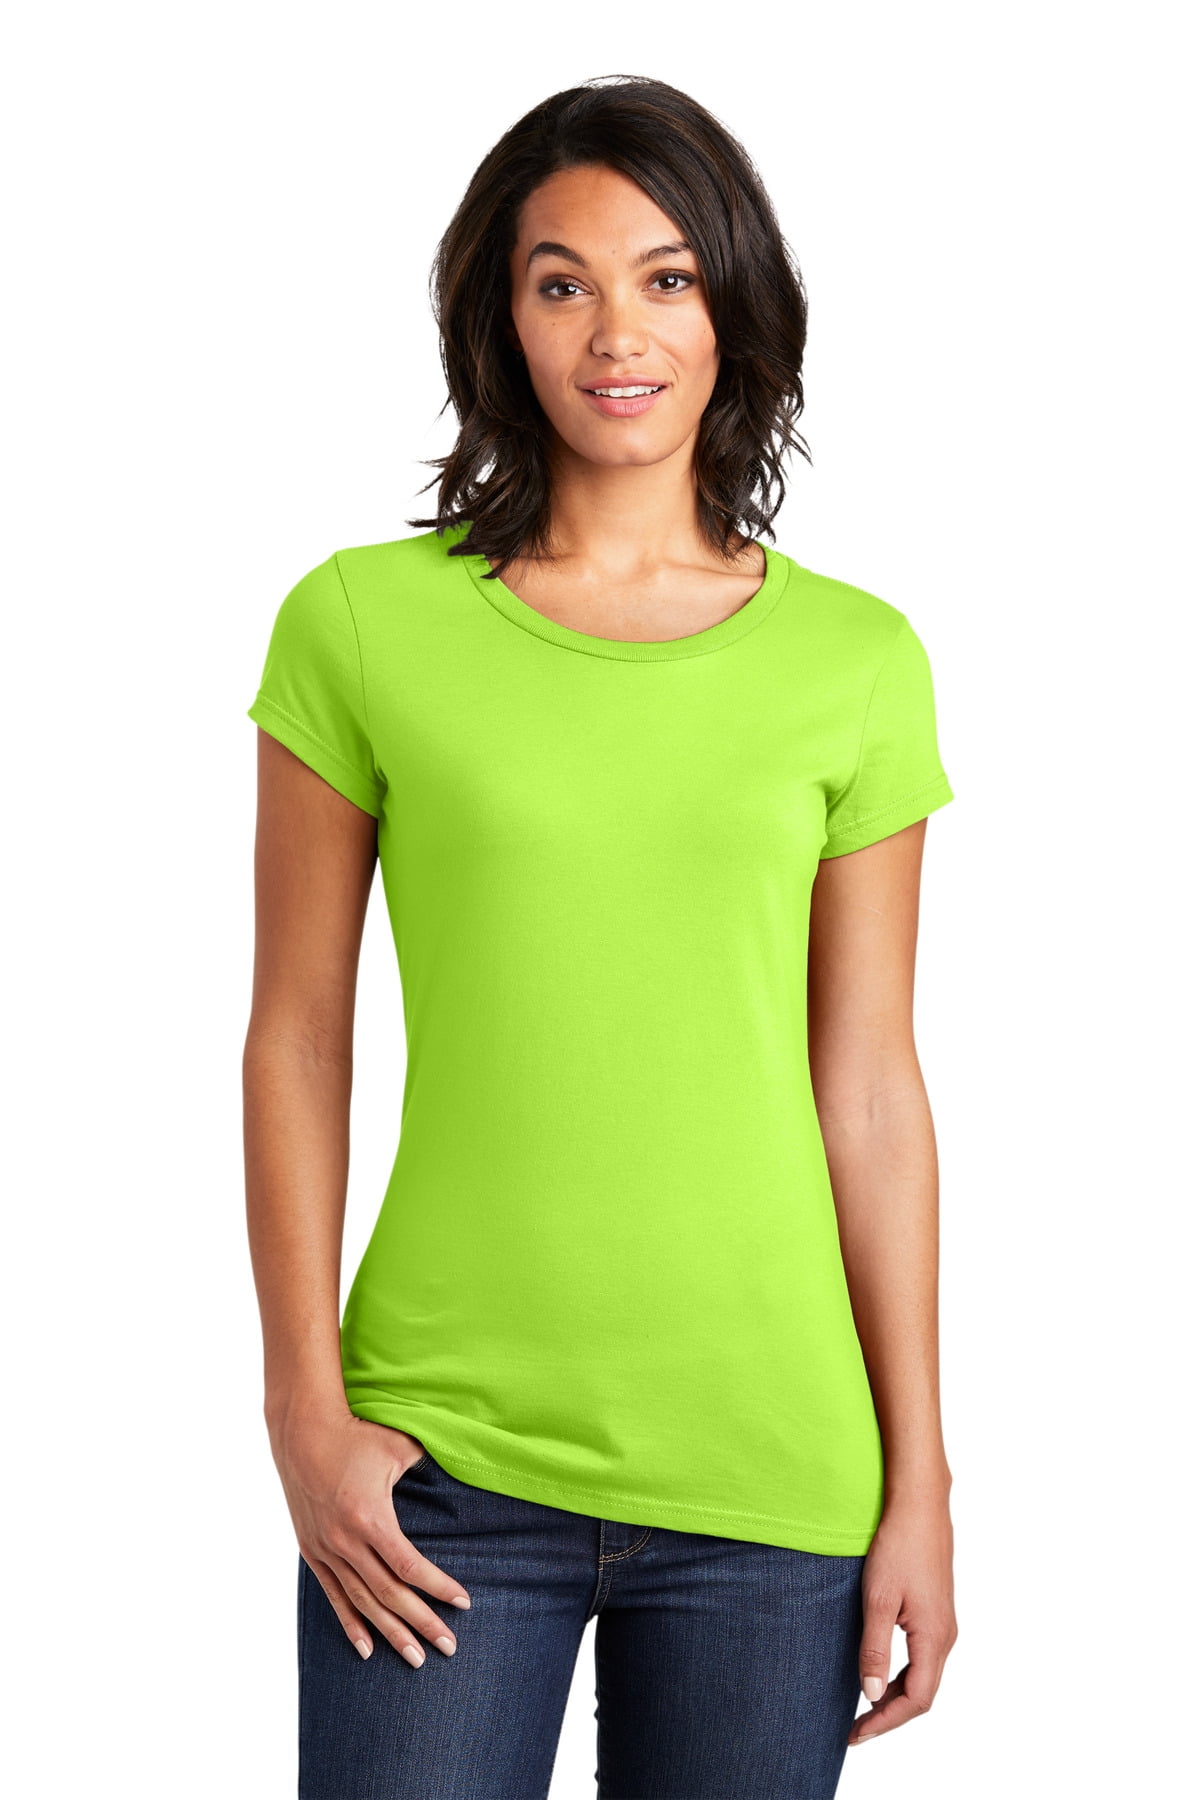 District DT6001 Juniors Very Important Tee , Lime Shock, 3XL